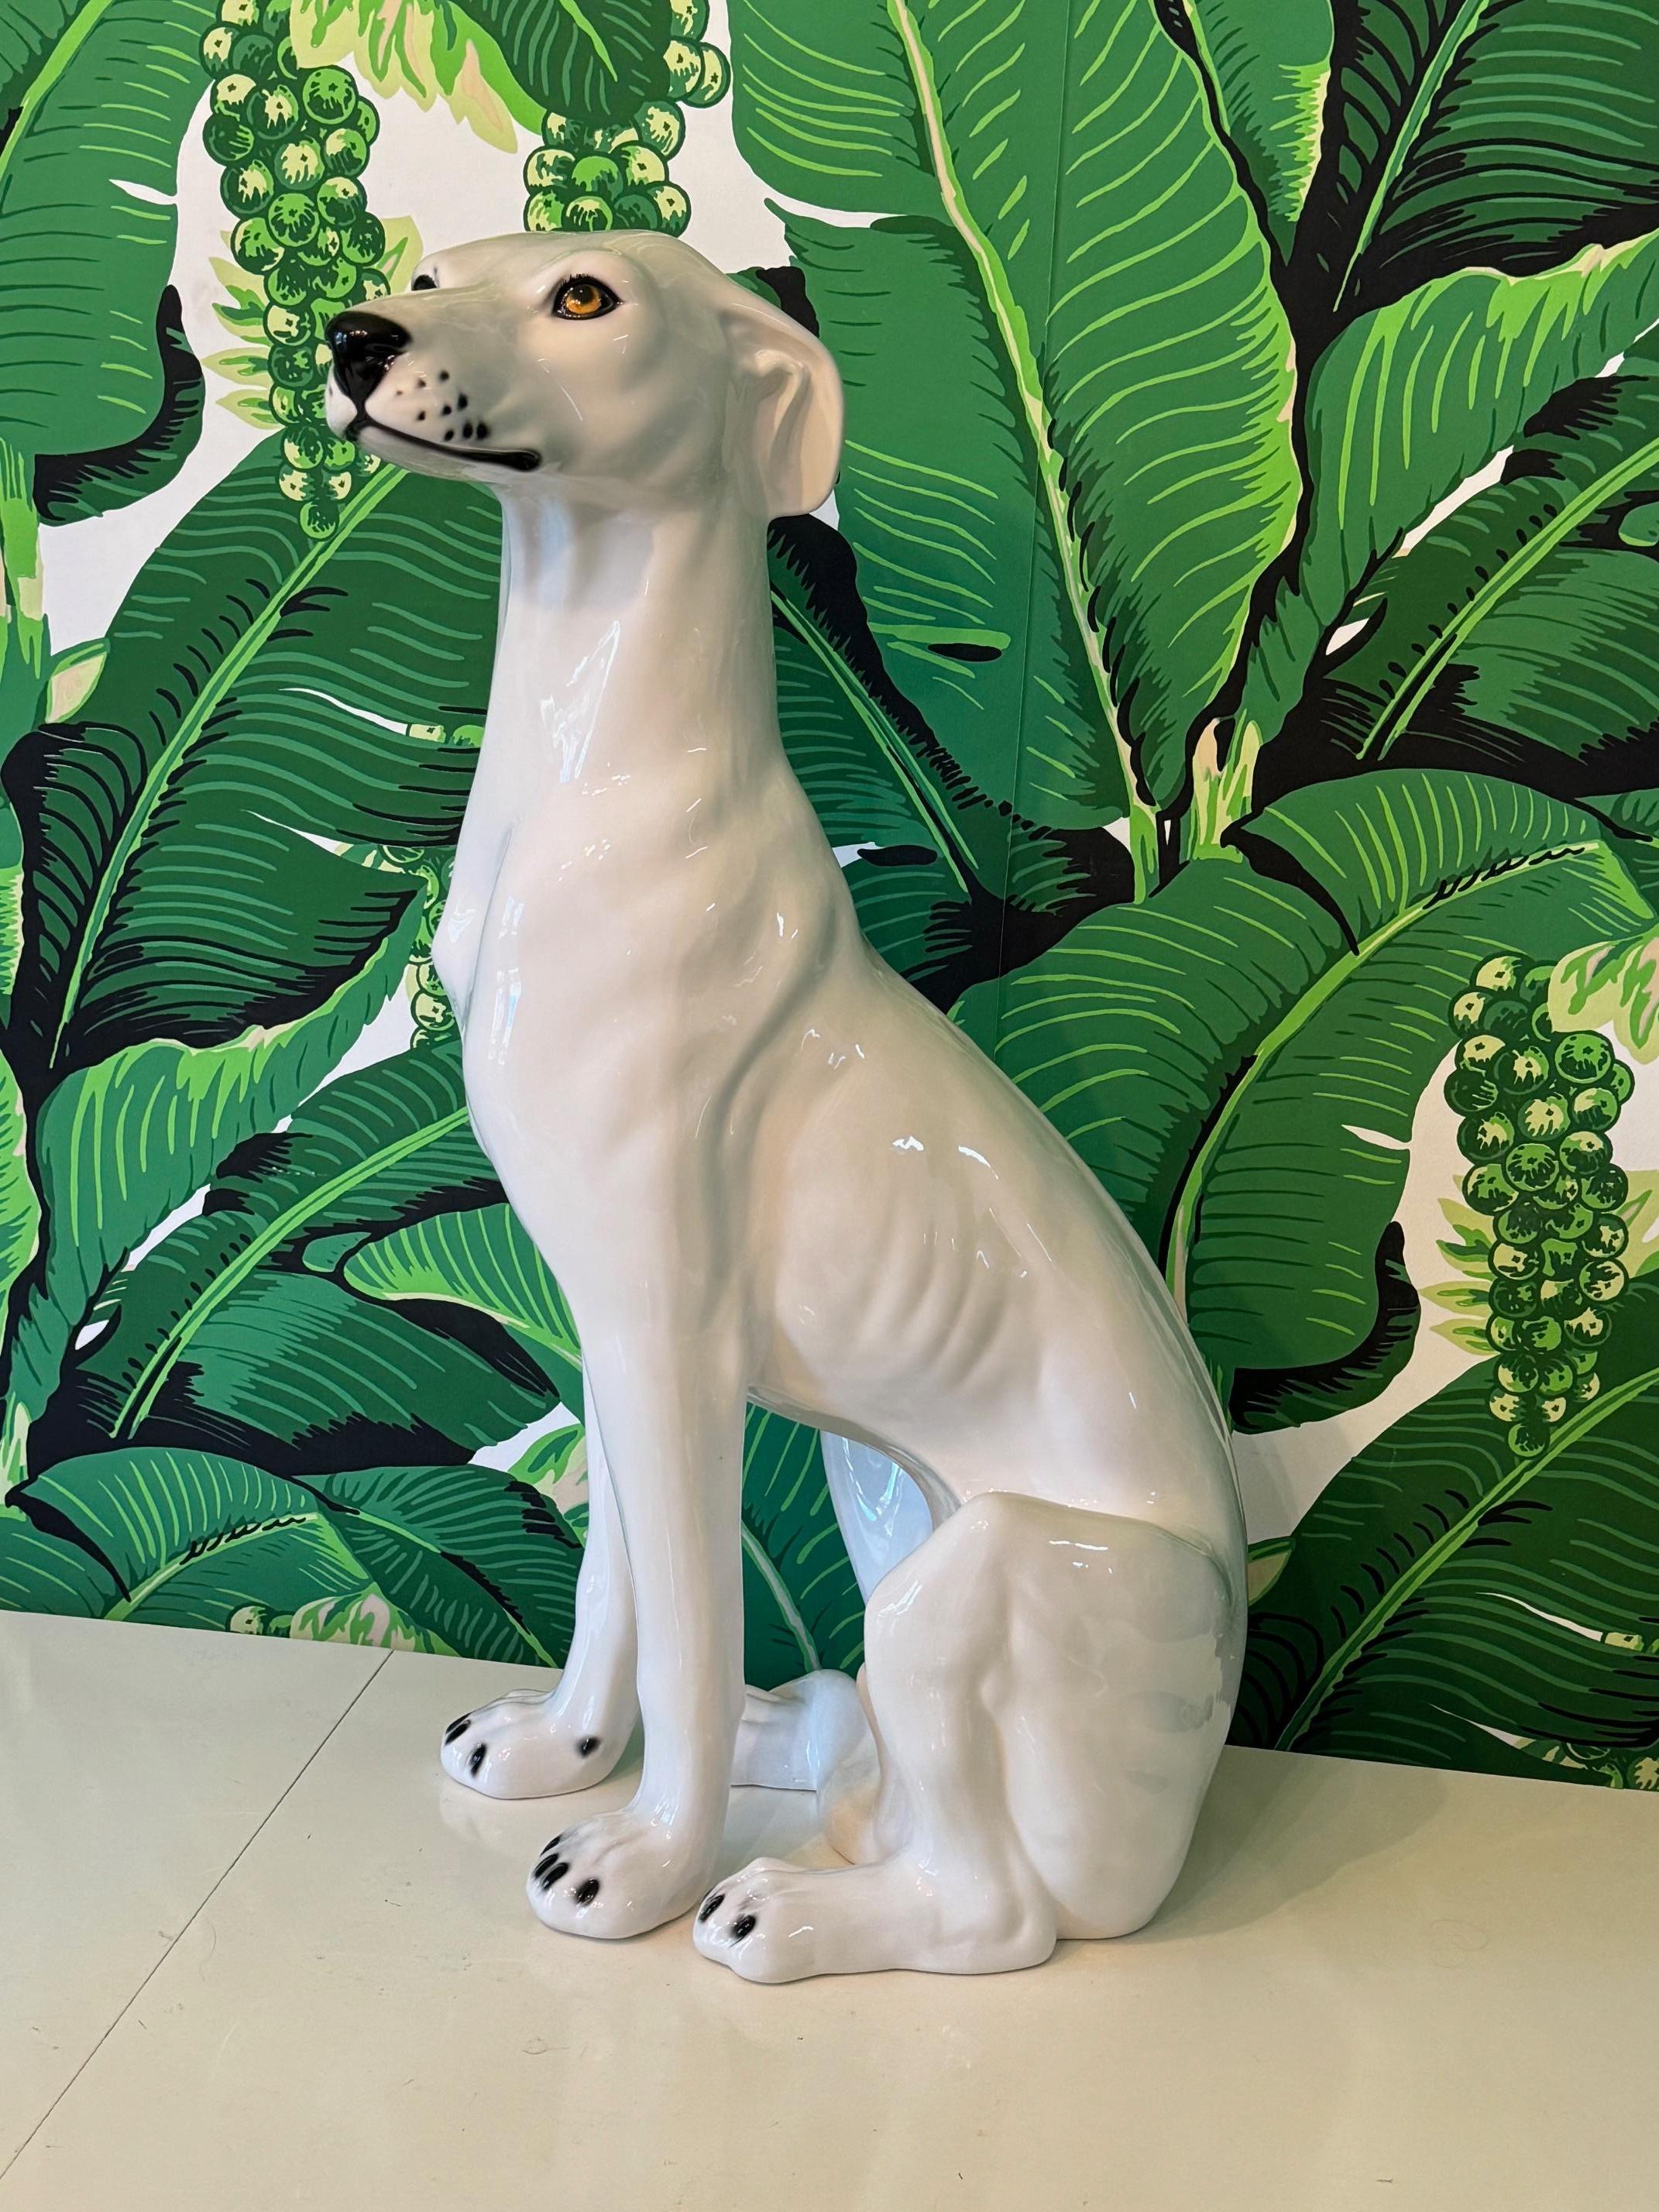 Large ceramic dog statue features life-like features and a high gloss finish. Very good condition with no cracks or chips.
For a shipping quote to your exact zip code, please message us.
